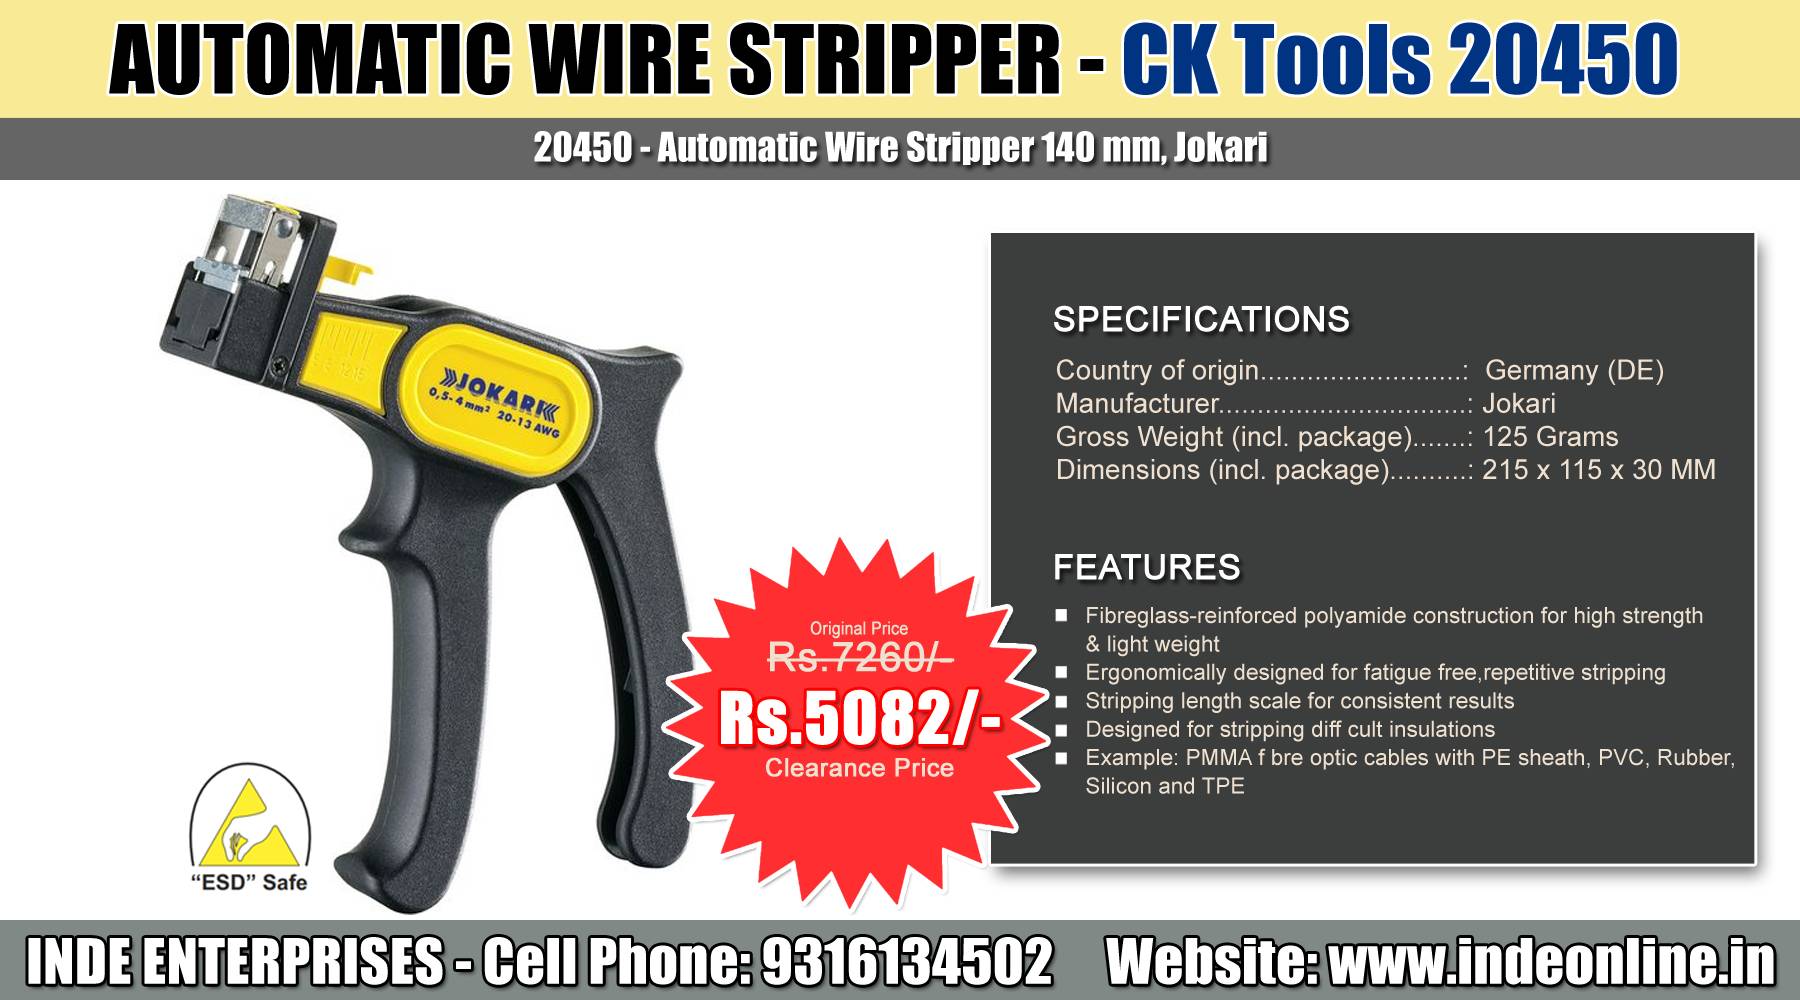 Automatic Wire Stripper - CK Tool 20450 Price Rs.5082